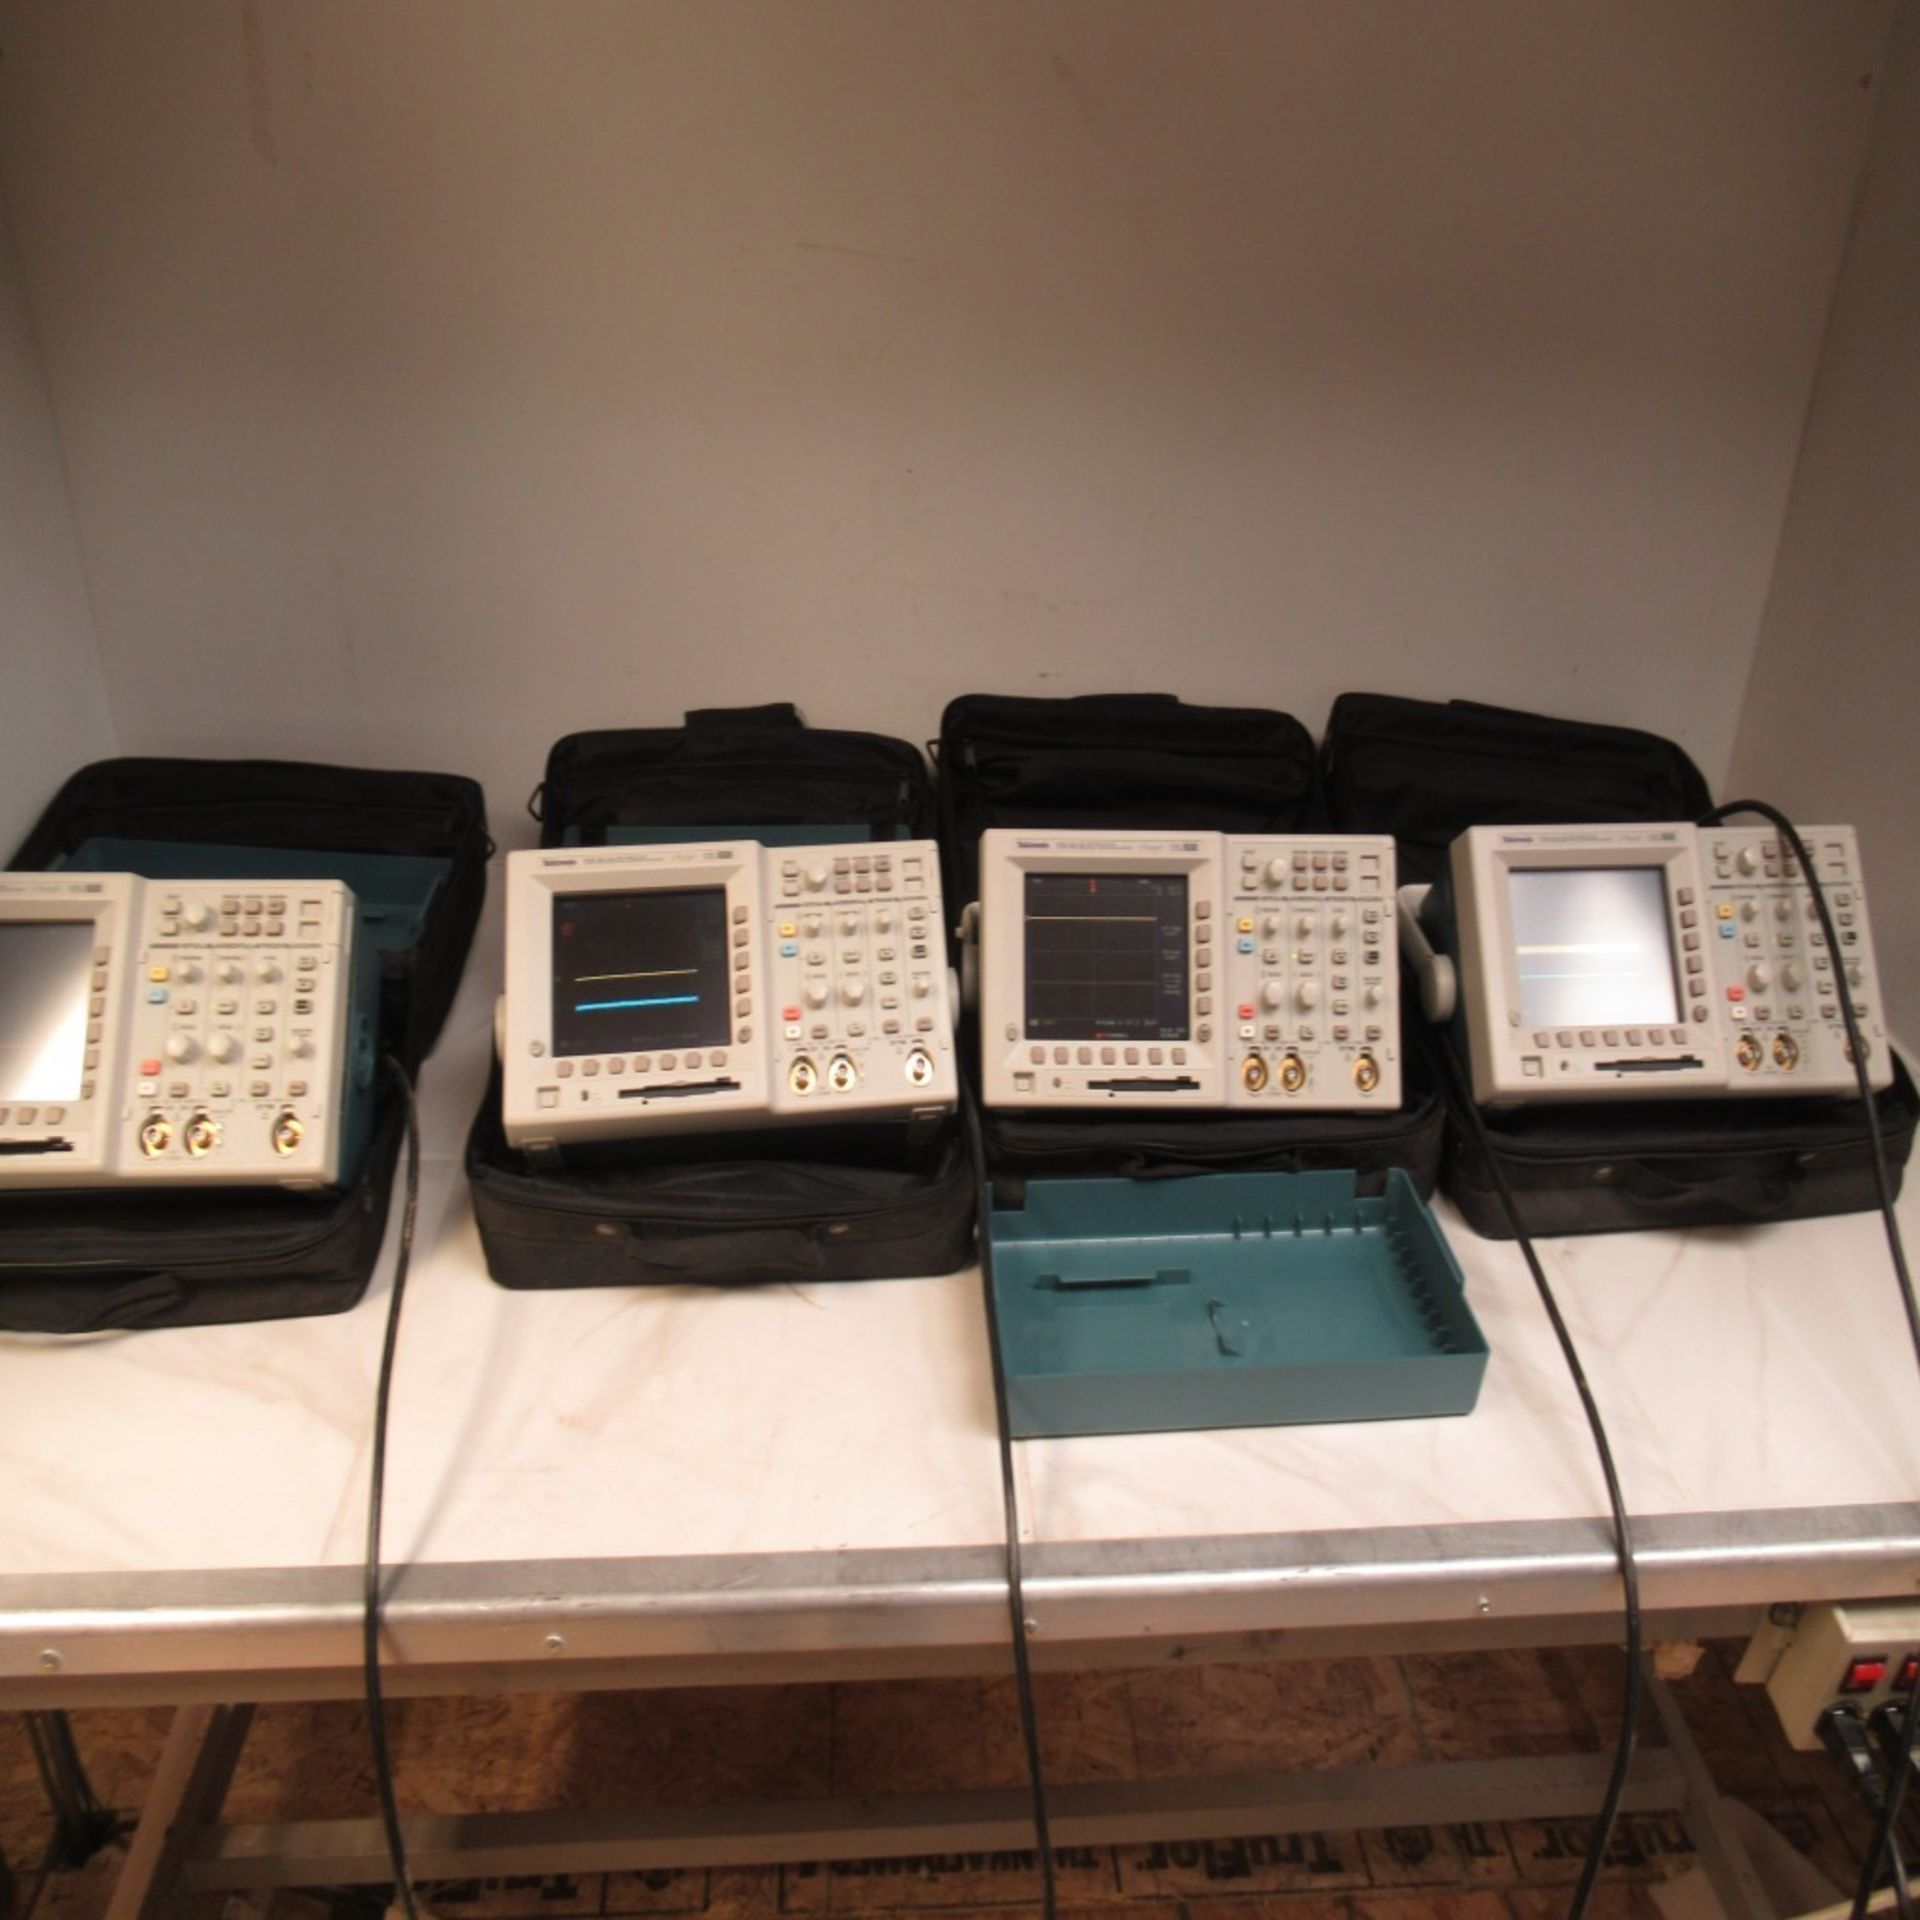 LOT OF 4 TEKTRONIX TDS3012B TWO CHANNEL DIGITAL PHOSPHOR OSCILLOSCOPES, WITH PADDED CARRY CASES AND